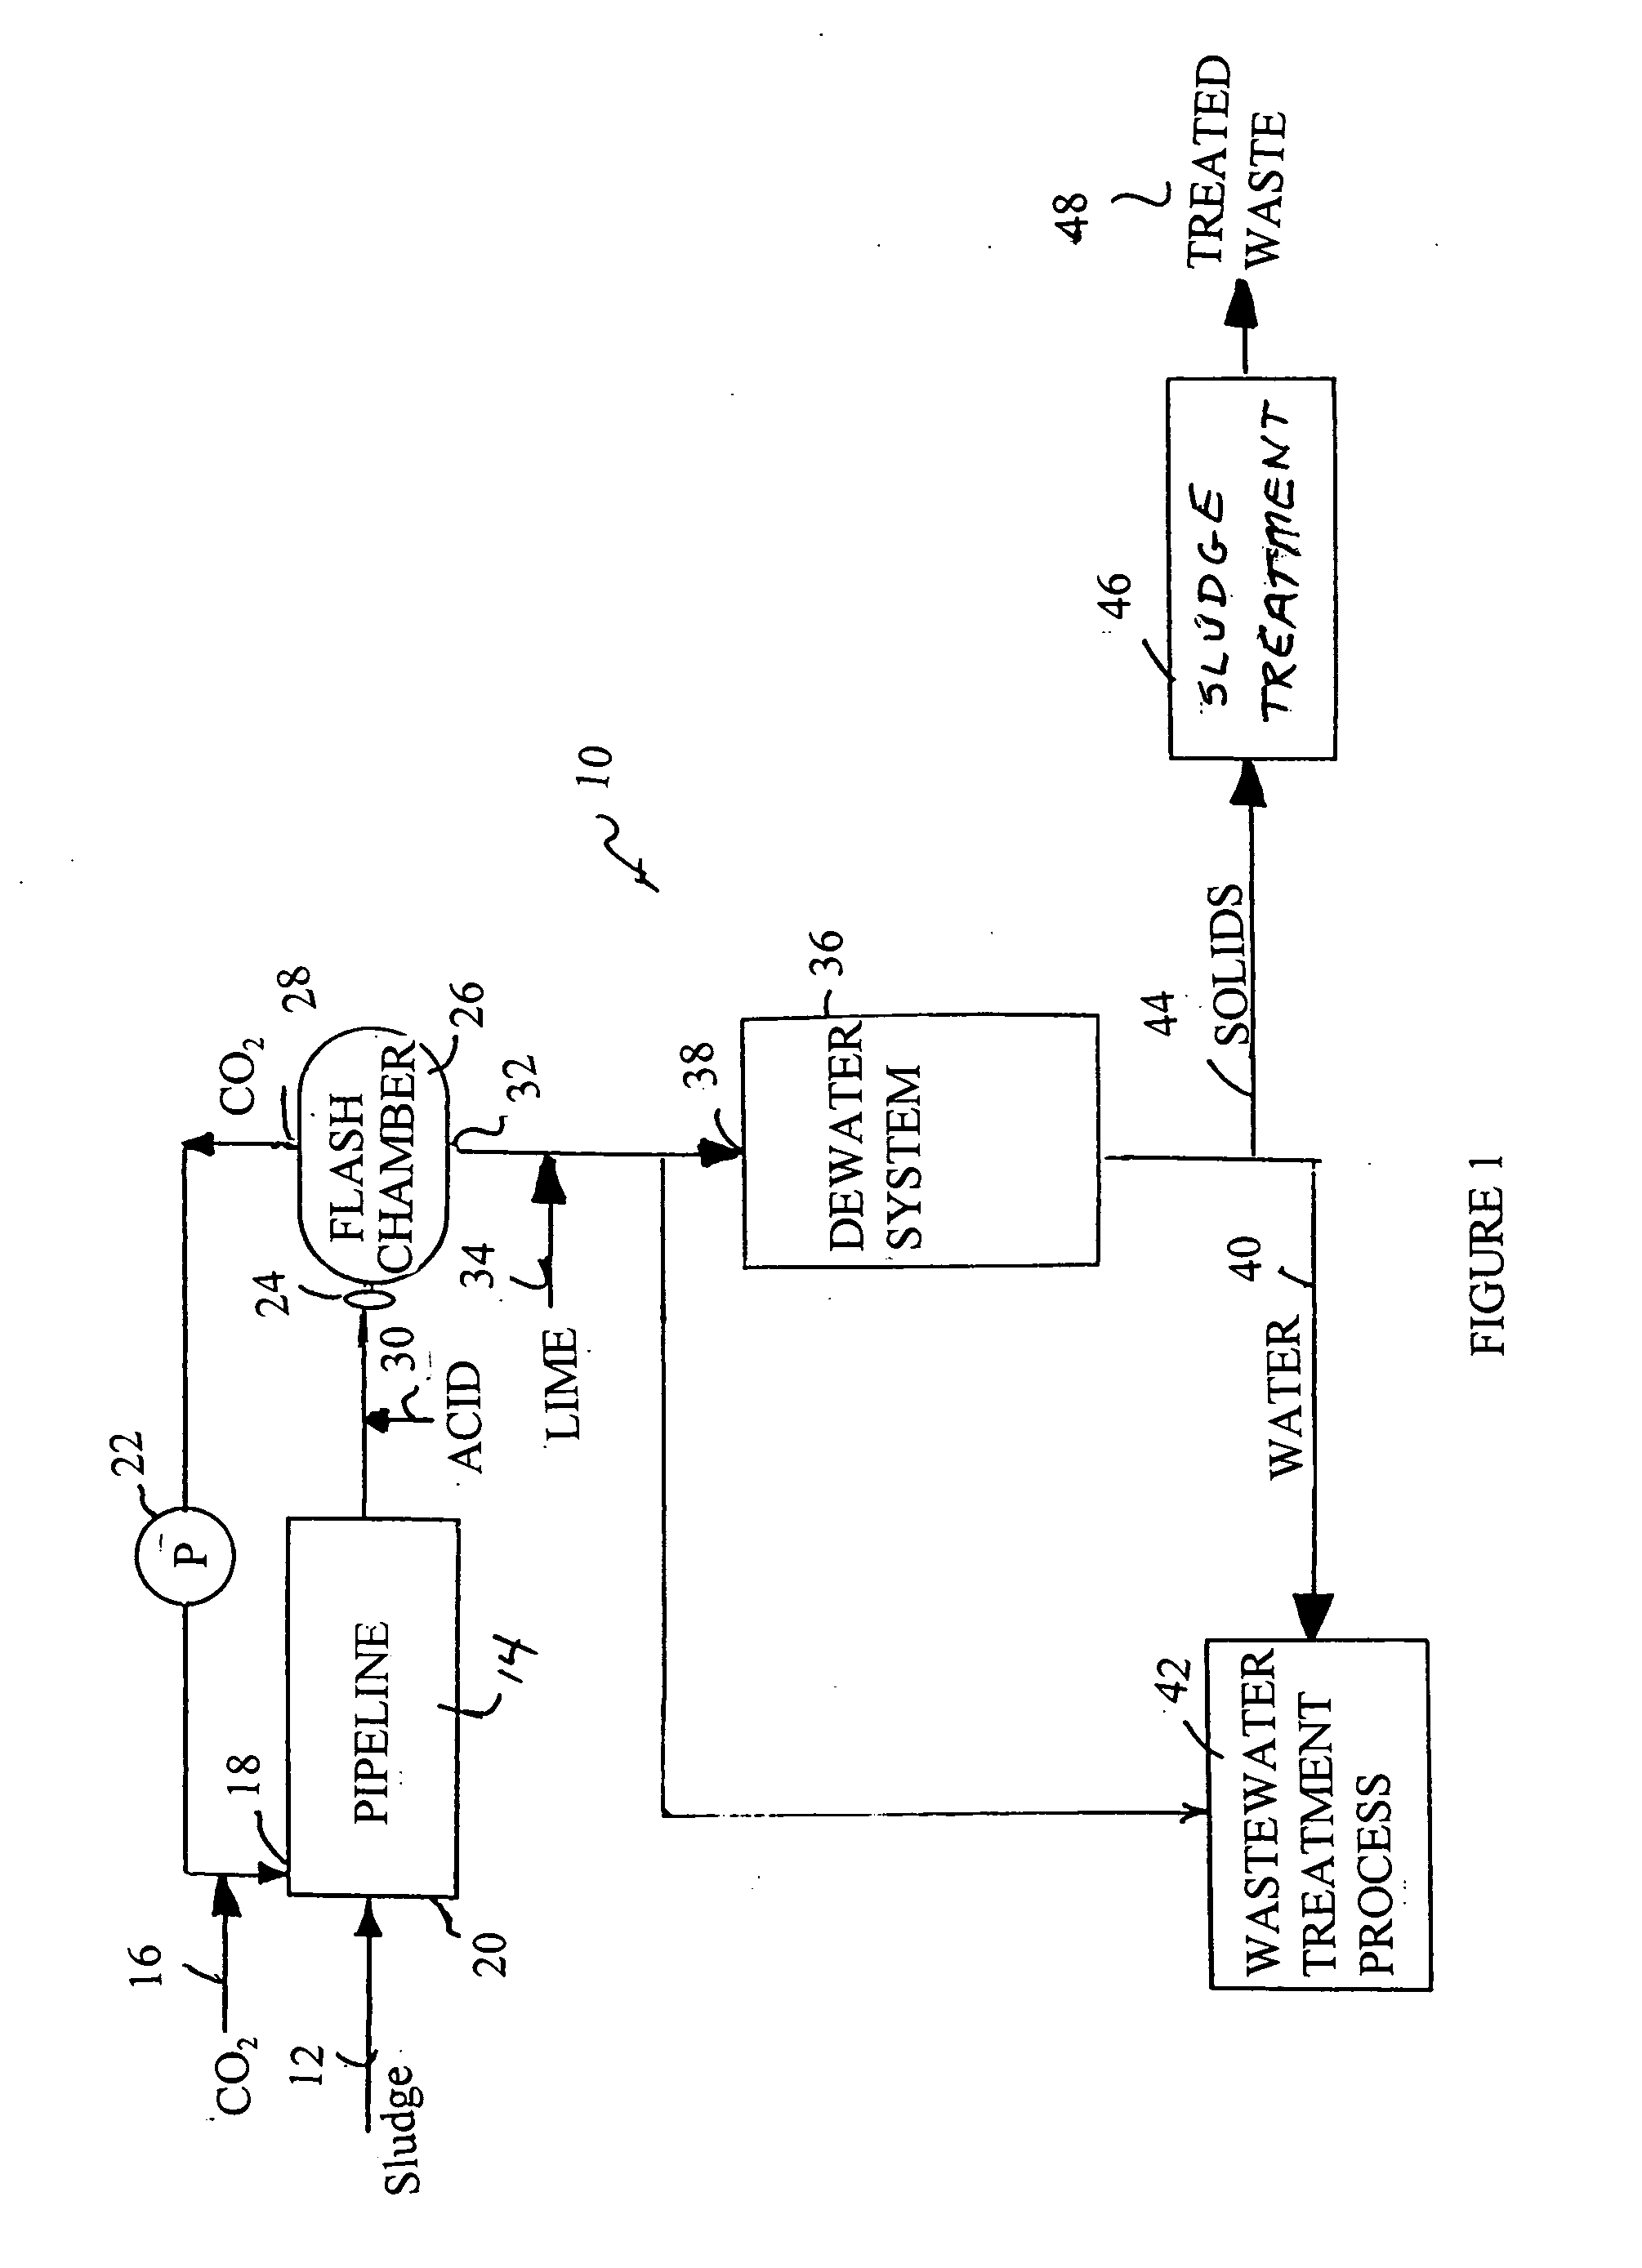 Process for removing interstitial water from a wastewater sludge